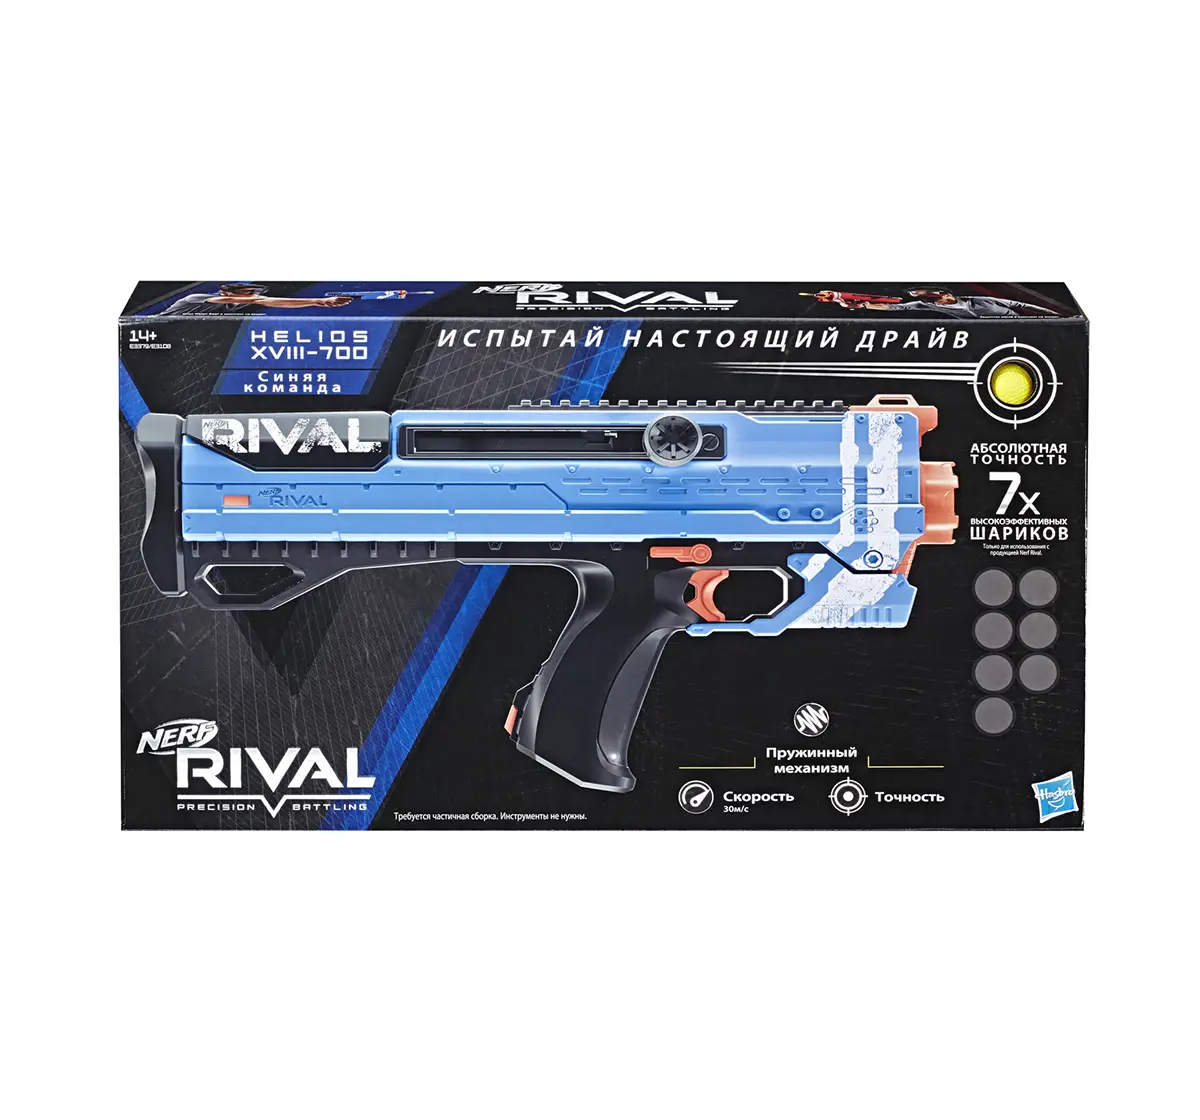 NERF RIVAL HELIOS XVIII-700 Toy Gun Assorted Blasters for Kids age 14Y+ 